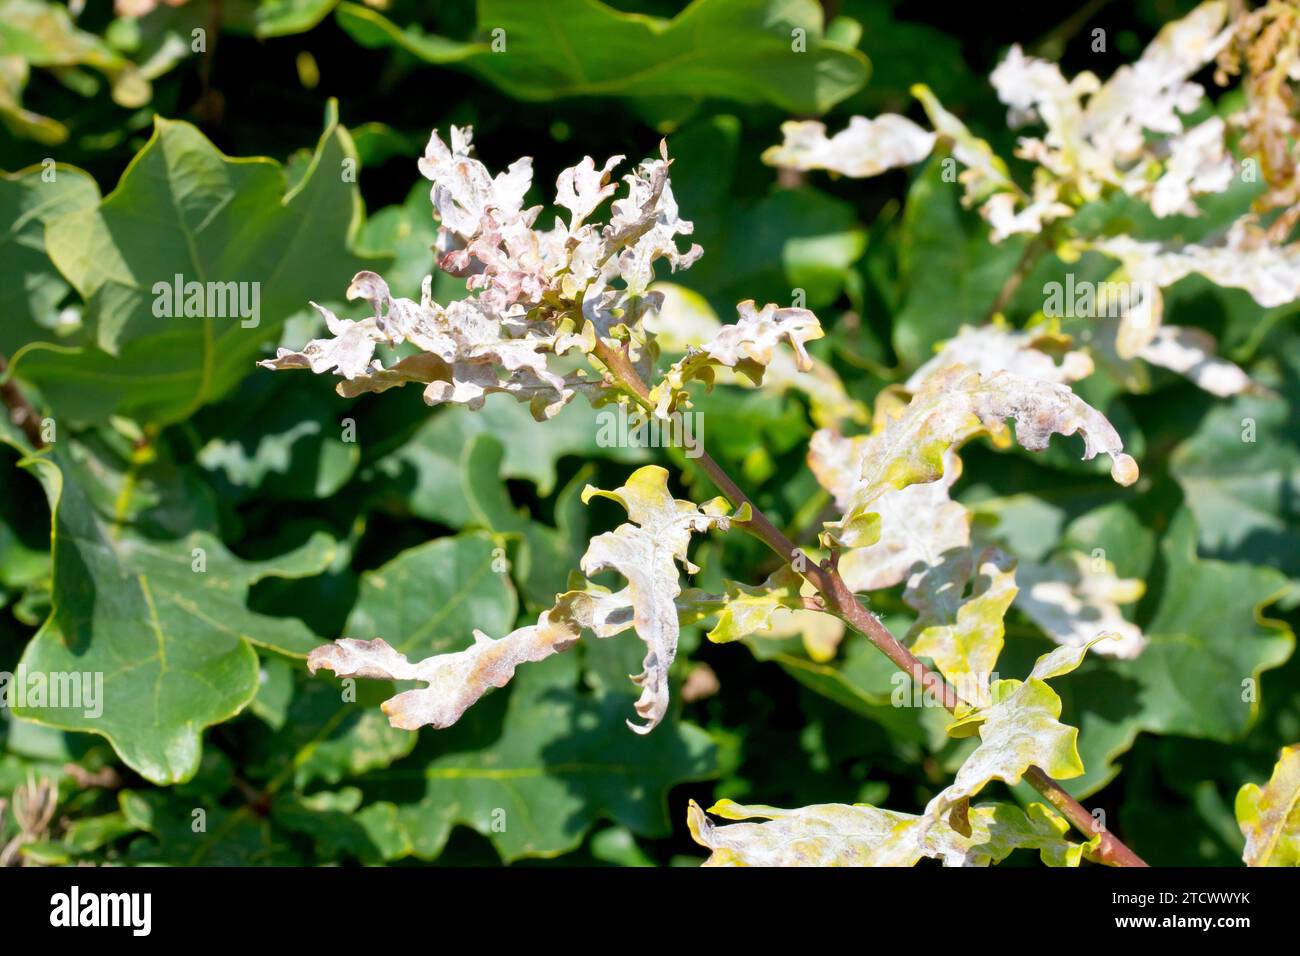 Close up of the leaves of a young Oak (quercus robur, quercus patraea) under attack by Powdery Mildew (erysiphe alphitoides, microsphaera alphitoides) Stock Photo